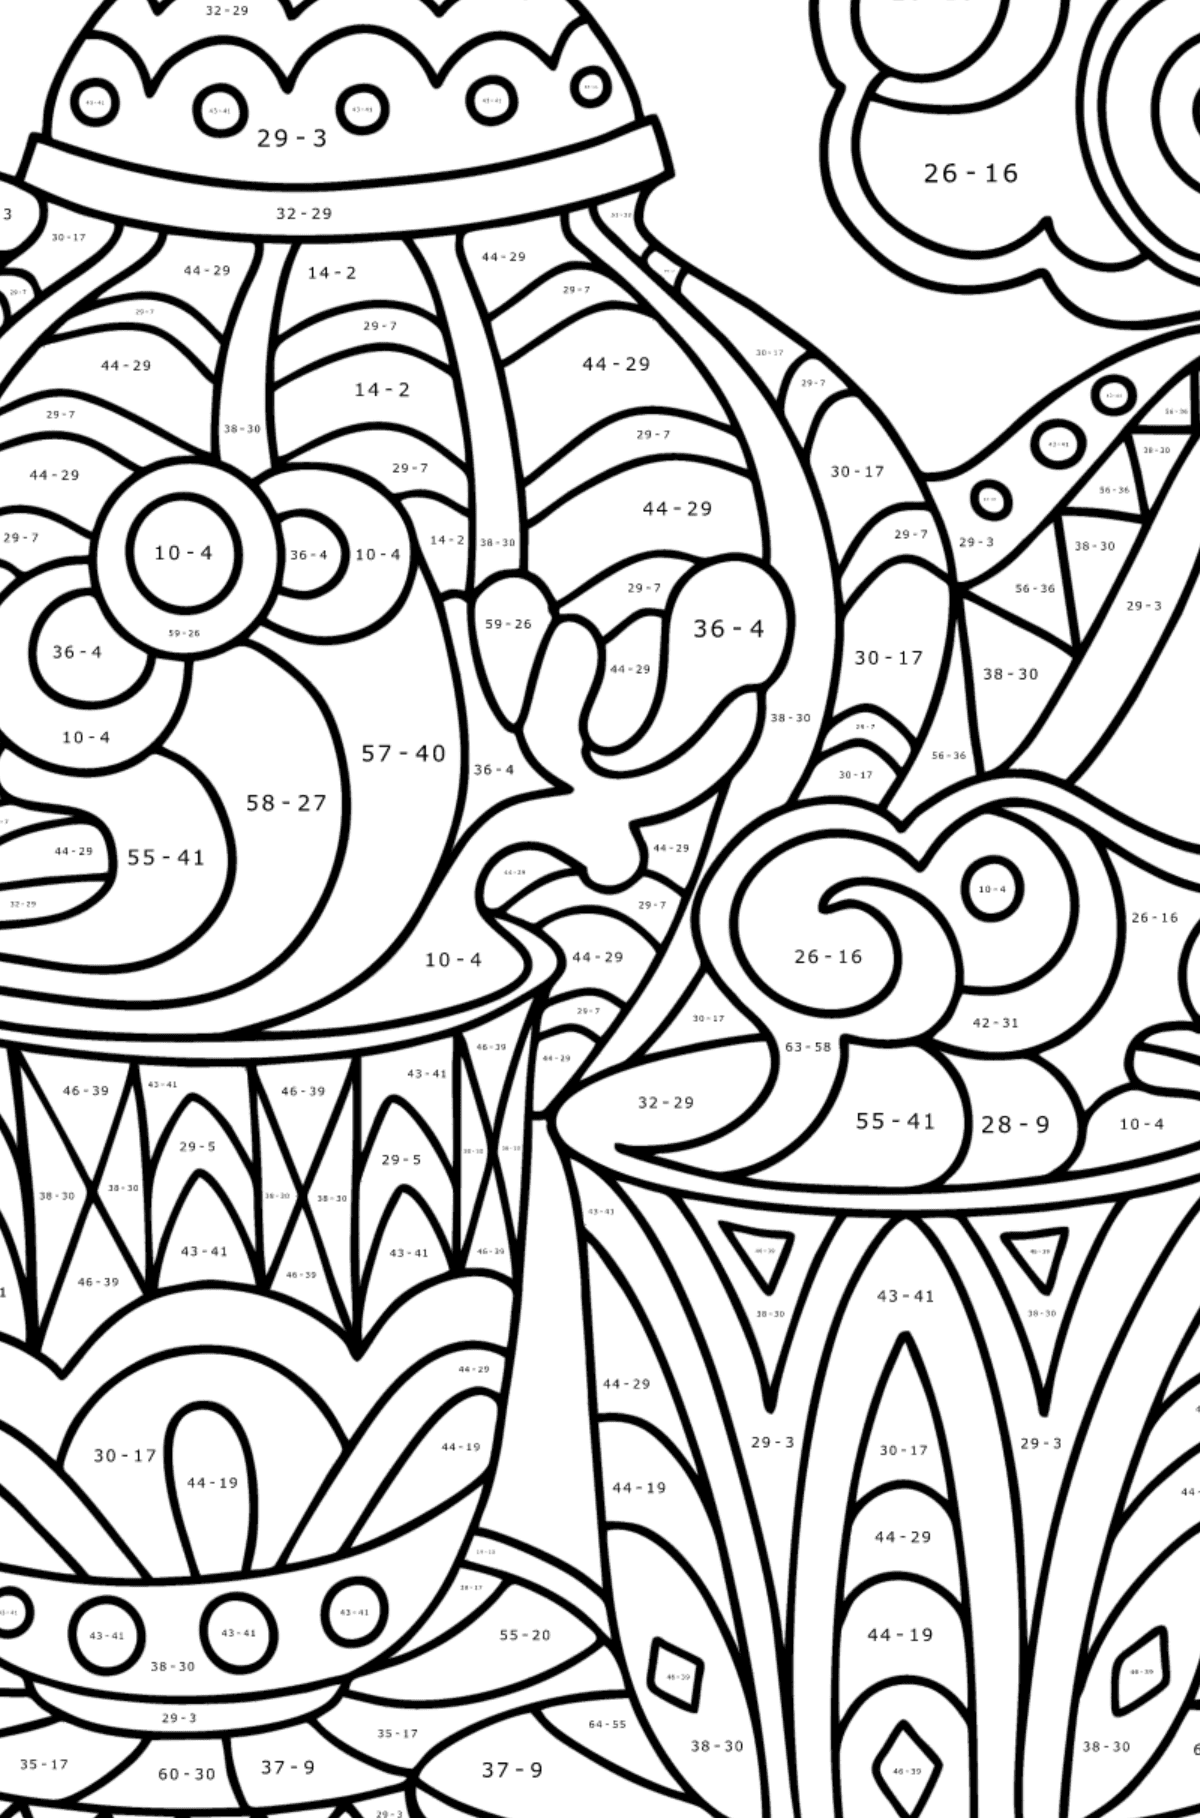 Doodle Coloring Page for Kids - Tea Party - Math Coloring - Subtraction for Kids